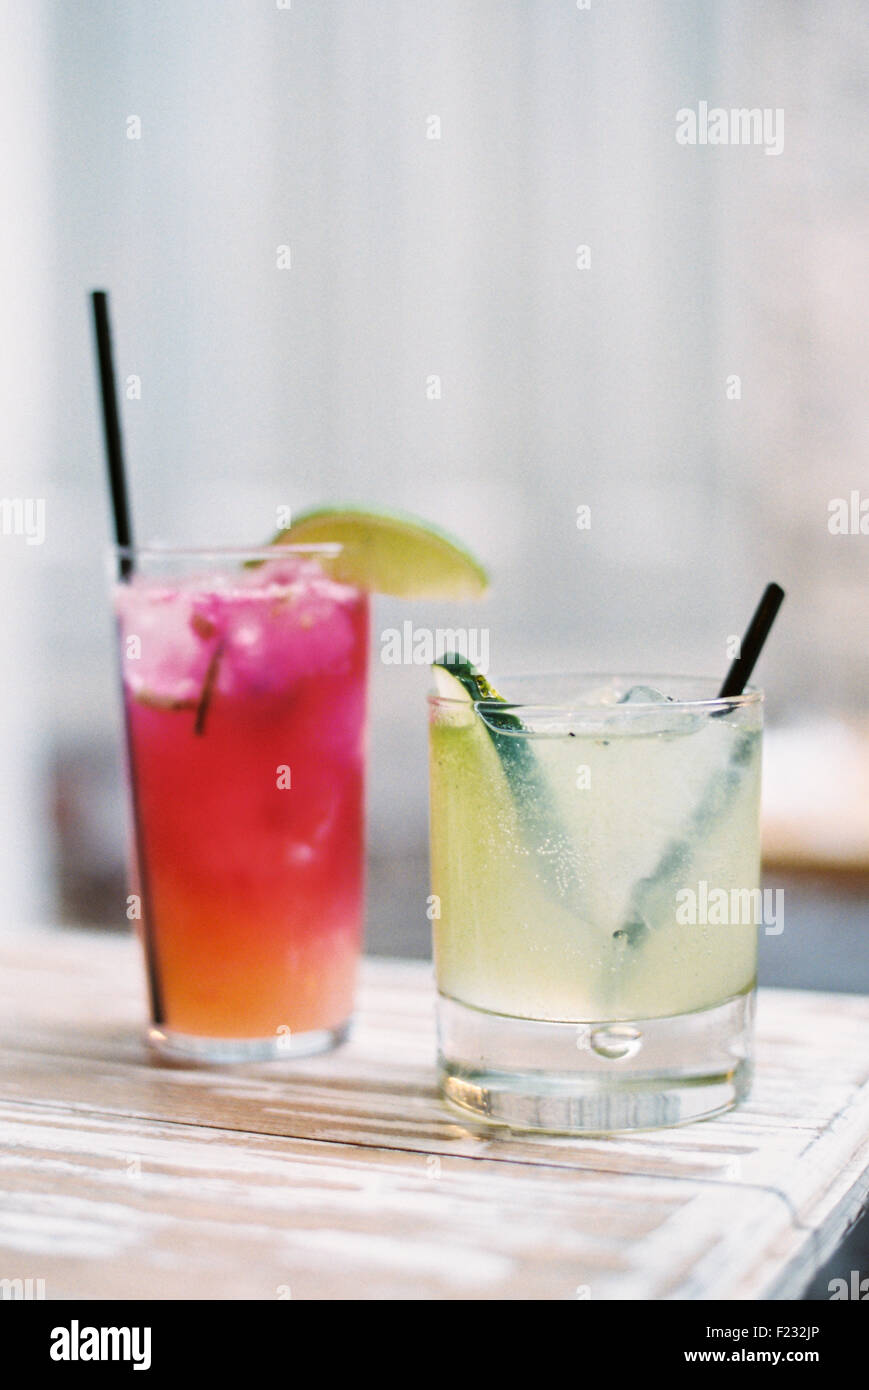 Two glasses of chilled drinks, with straws and garnishes. Lemonade and iced tea. Stock Photo